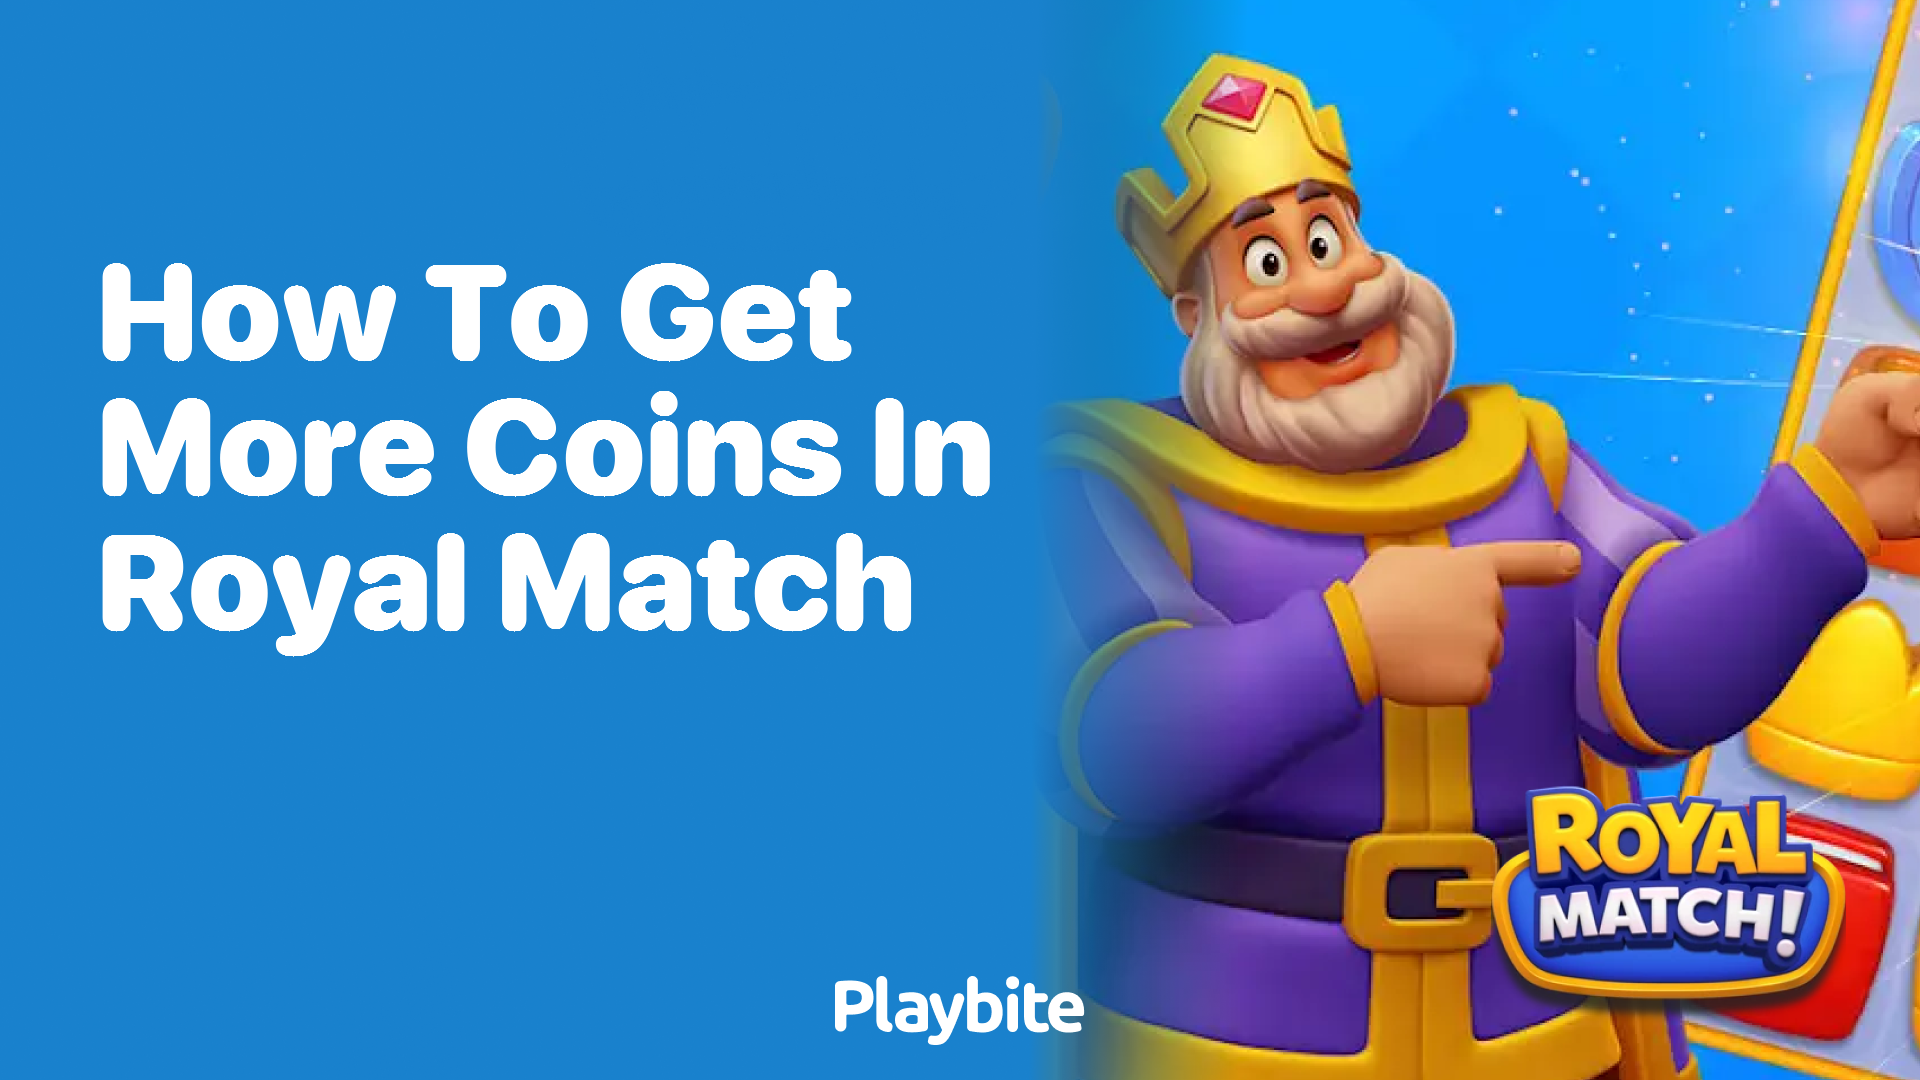 How to Get More Coins in Royal Match